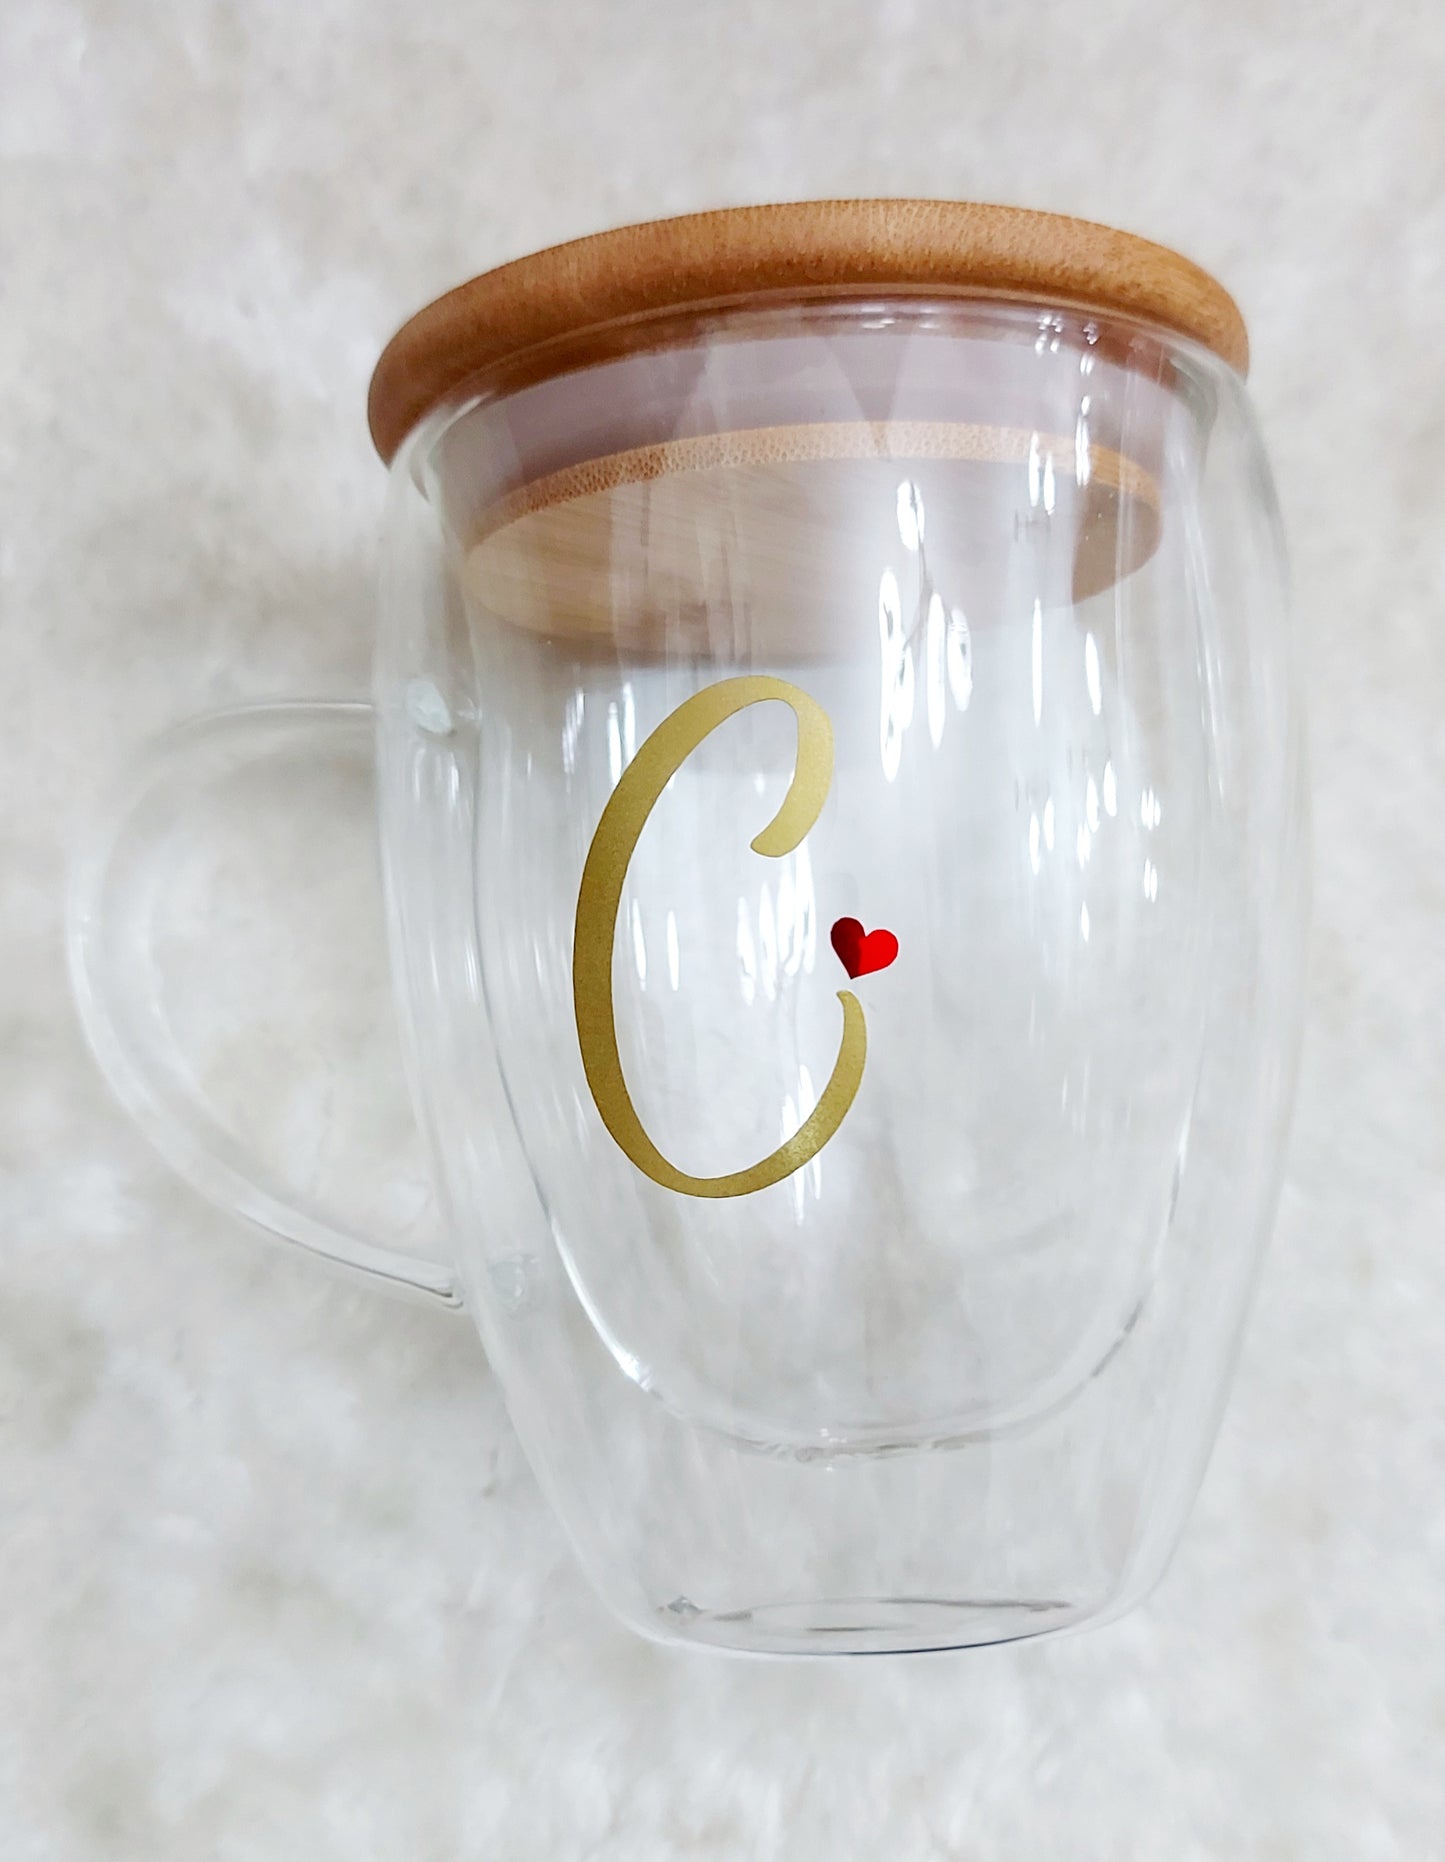 Double Walled Glass Mug with Bamboo Lid